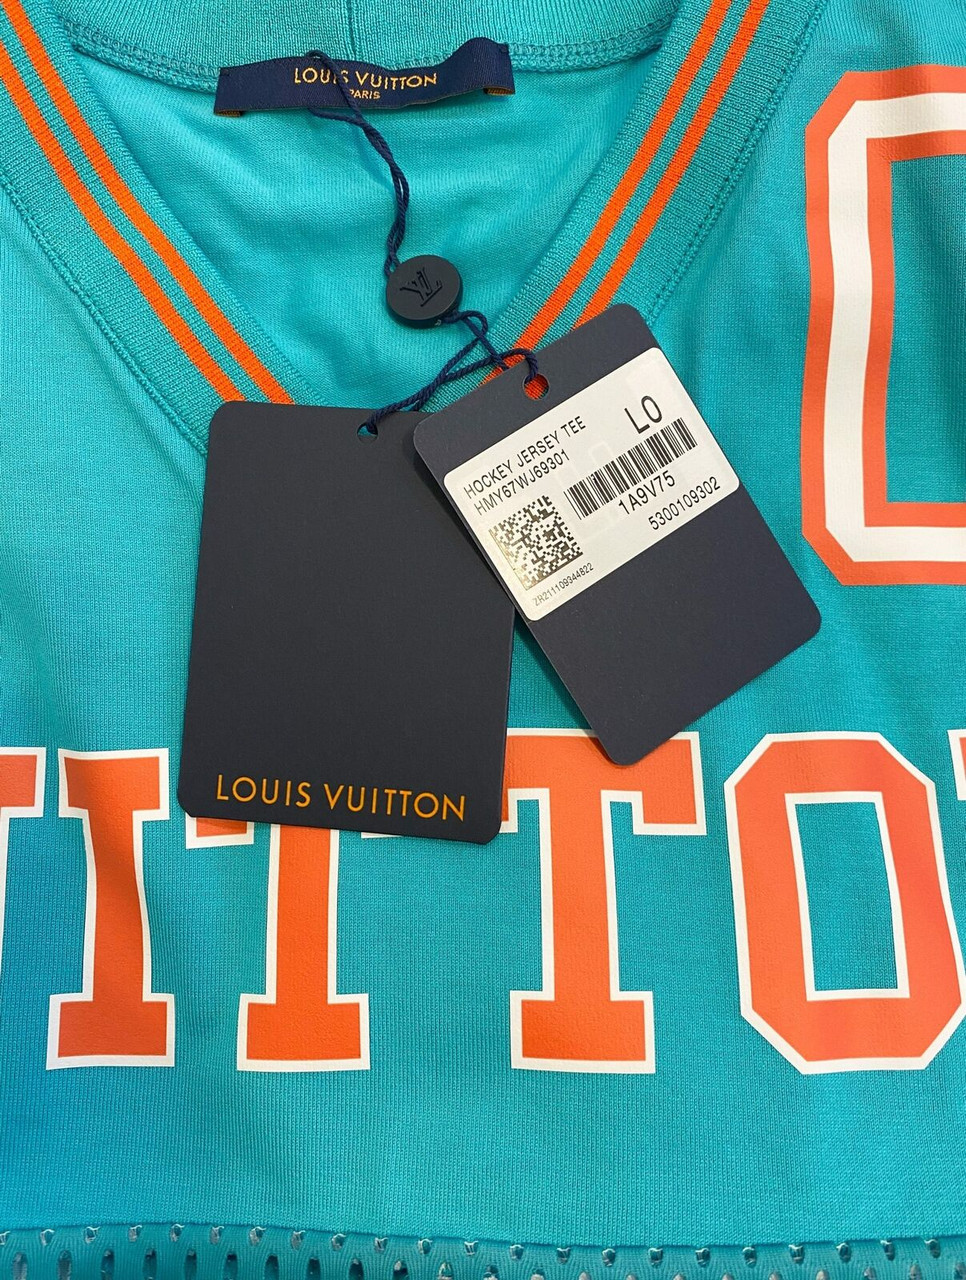 DISHIN™ on Instagram: Louis Vuitton limited edition “Hockey Jersey  T-Shirt” $1,090.00 USD After introducing hockey in SS22, Louis Vuitton has  hit the ice again. This sportswear-inspired piece channels inner hockey  fashion, with